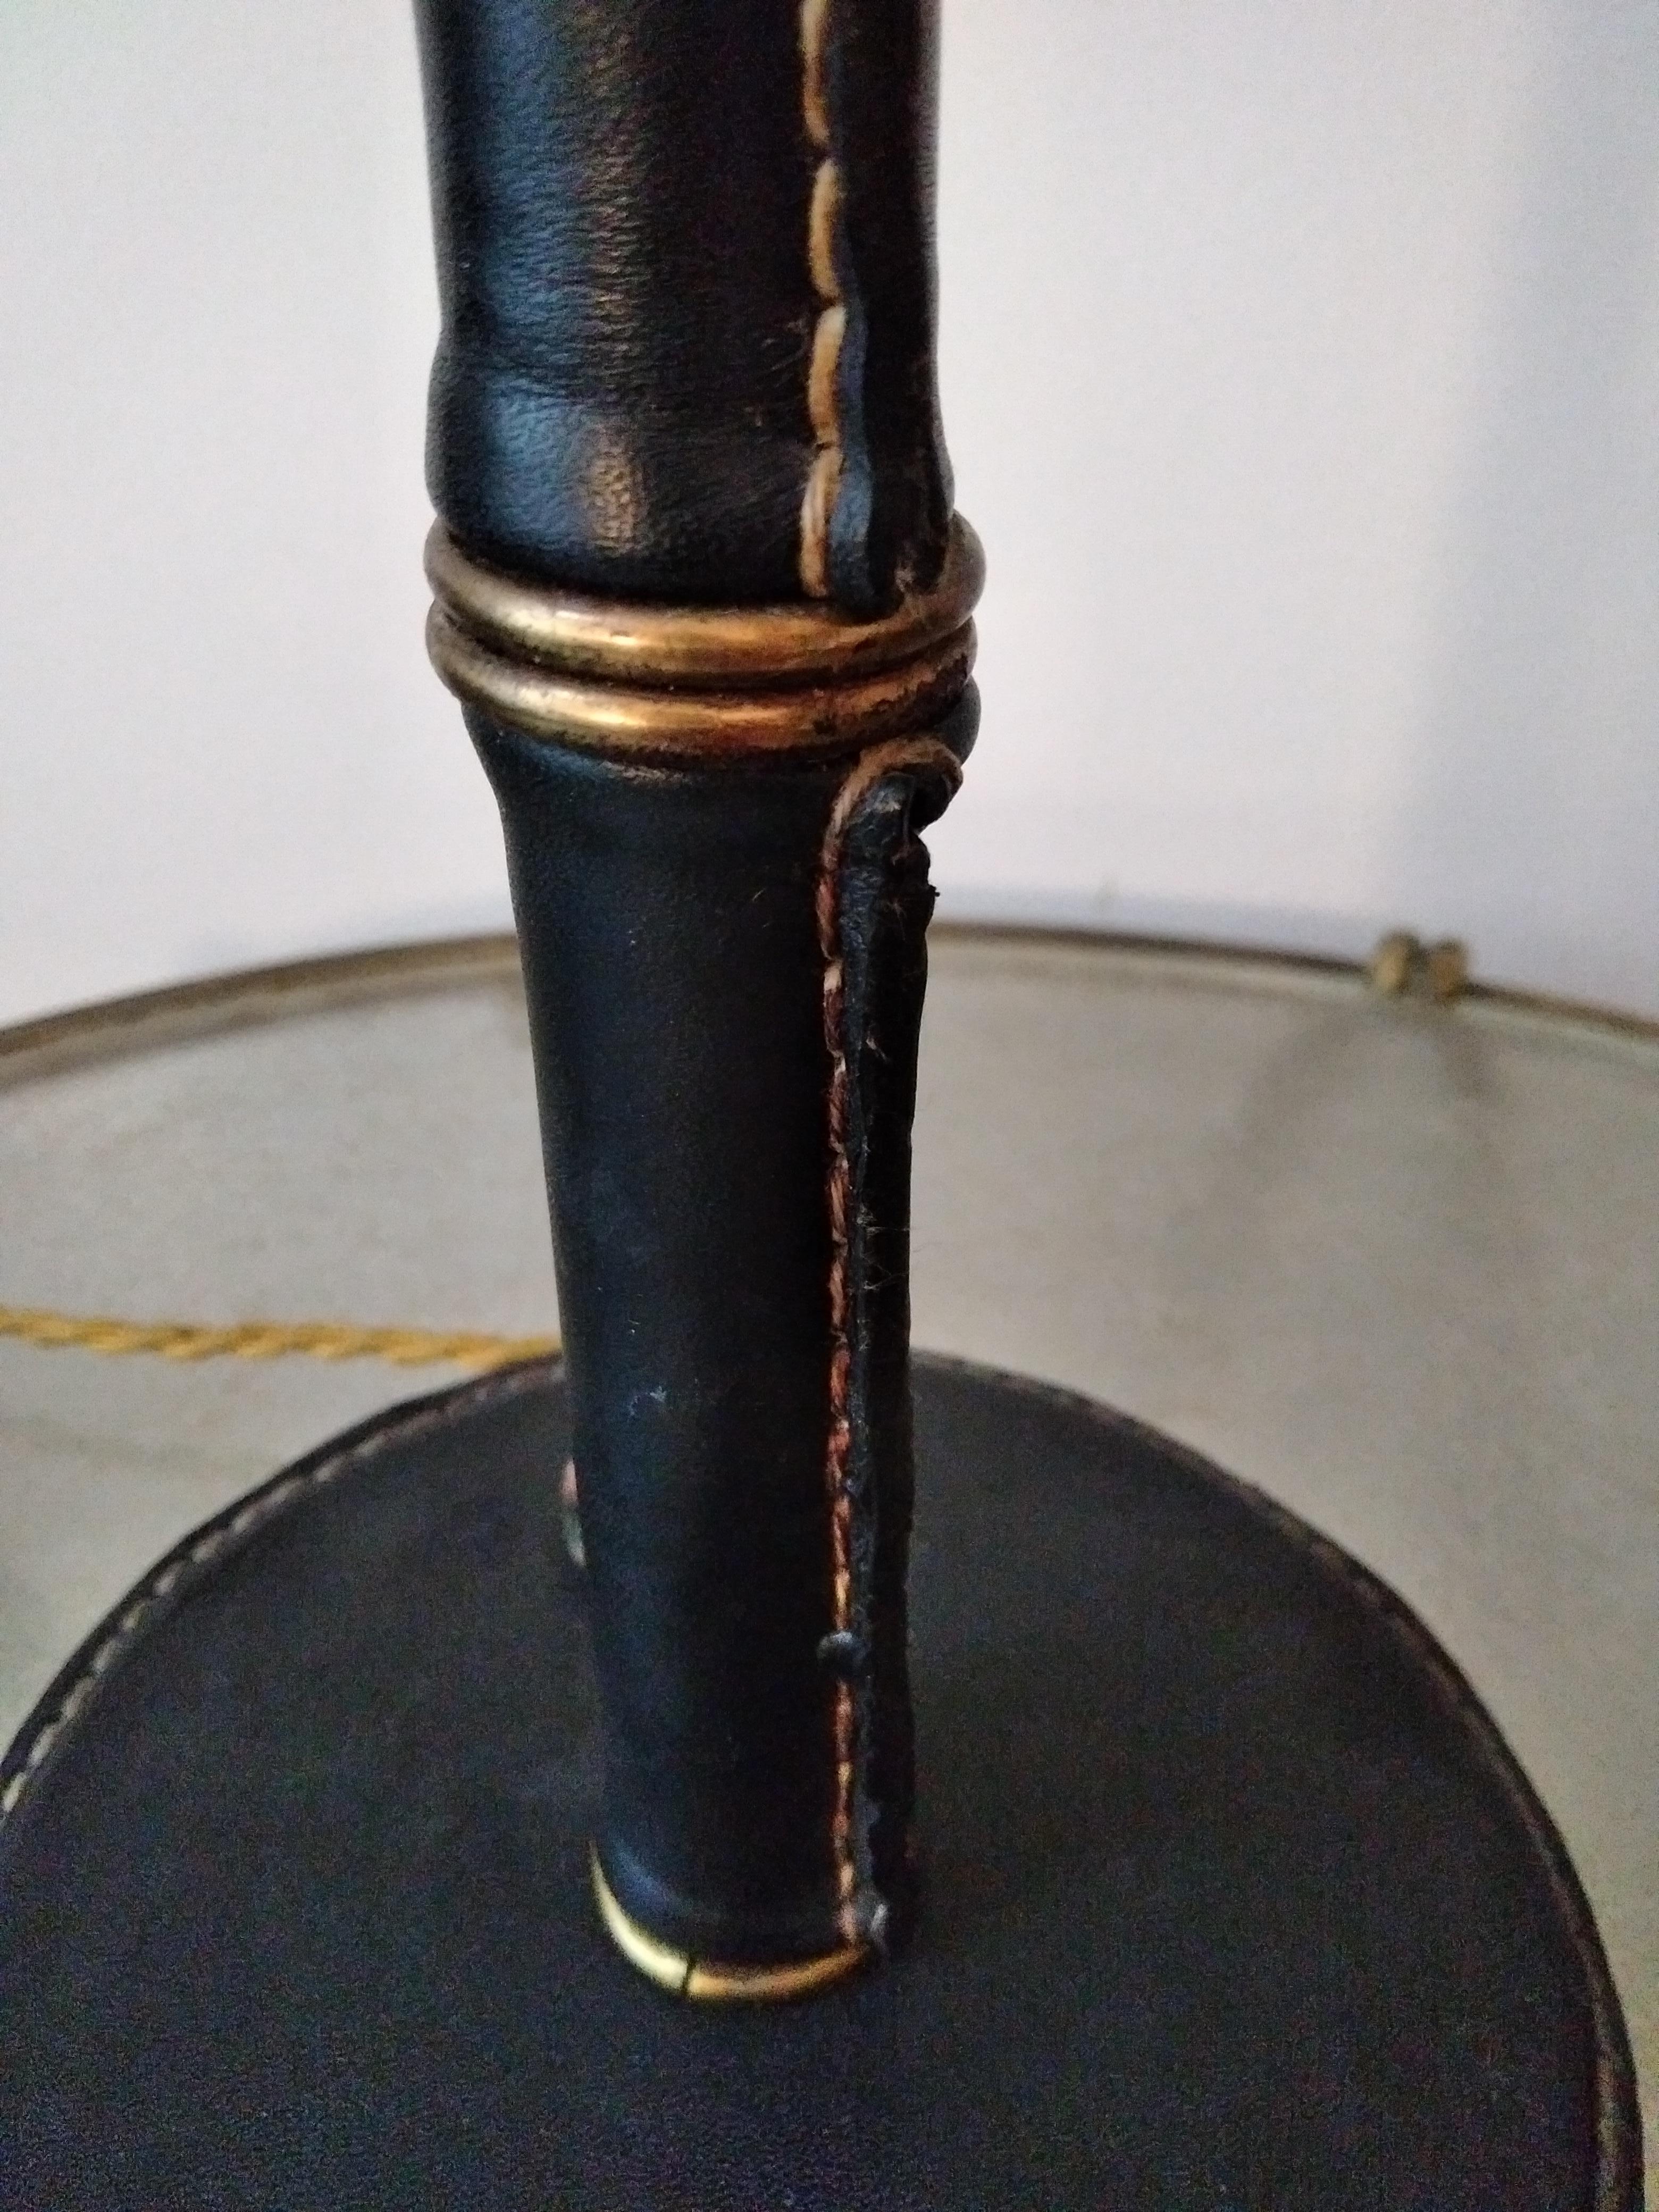 Jacques Adnet Black Stitched Leather Table Lamp, Bamboo Form, French, 1950s For Sale 2